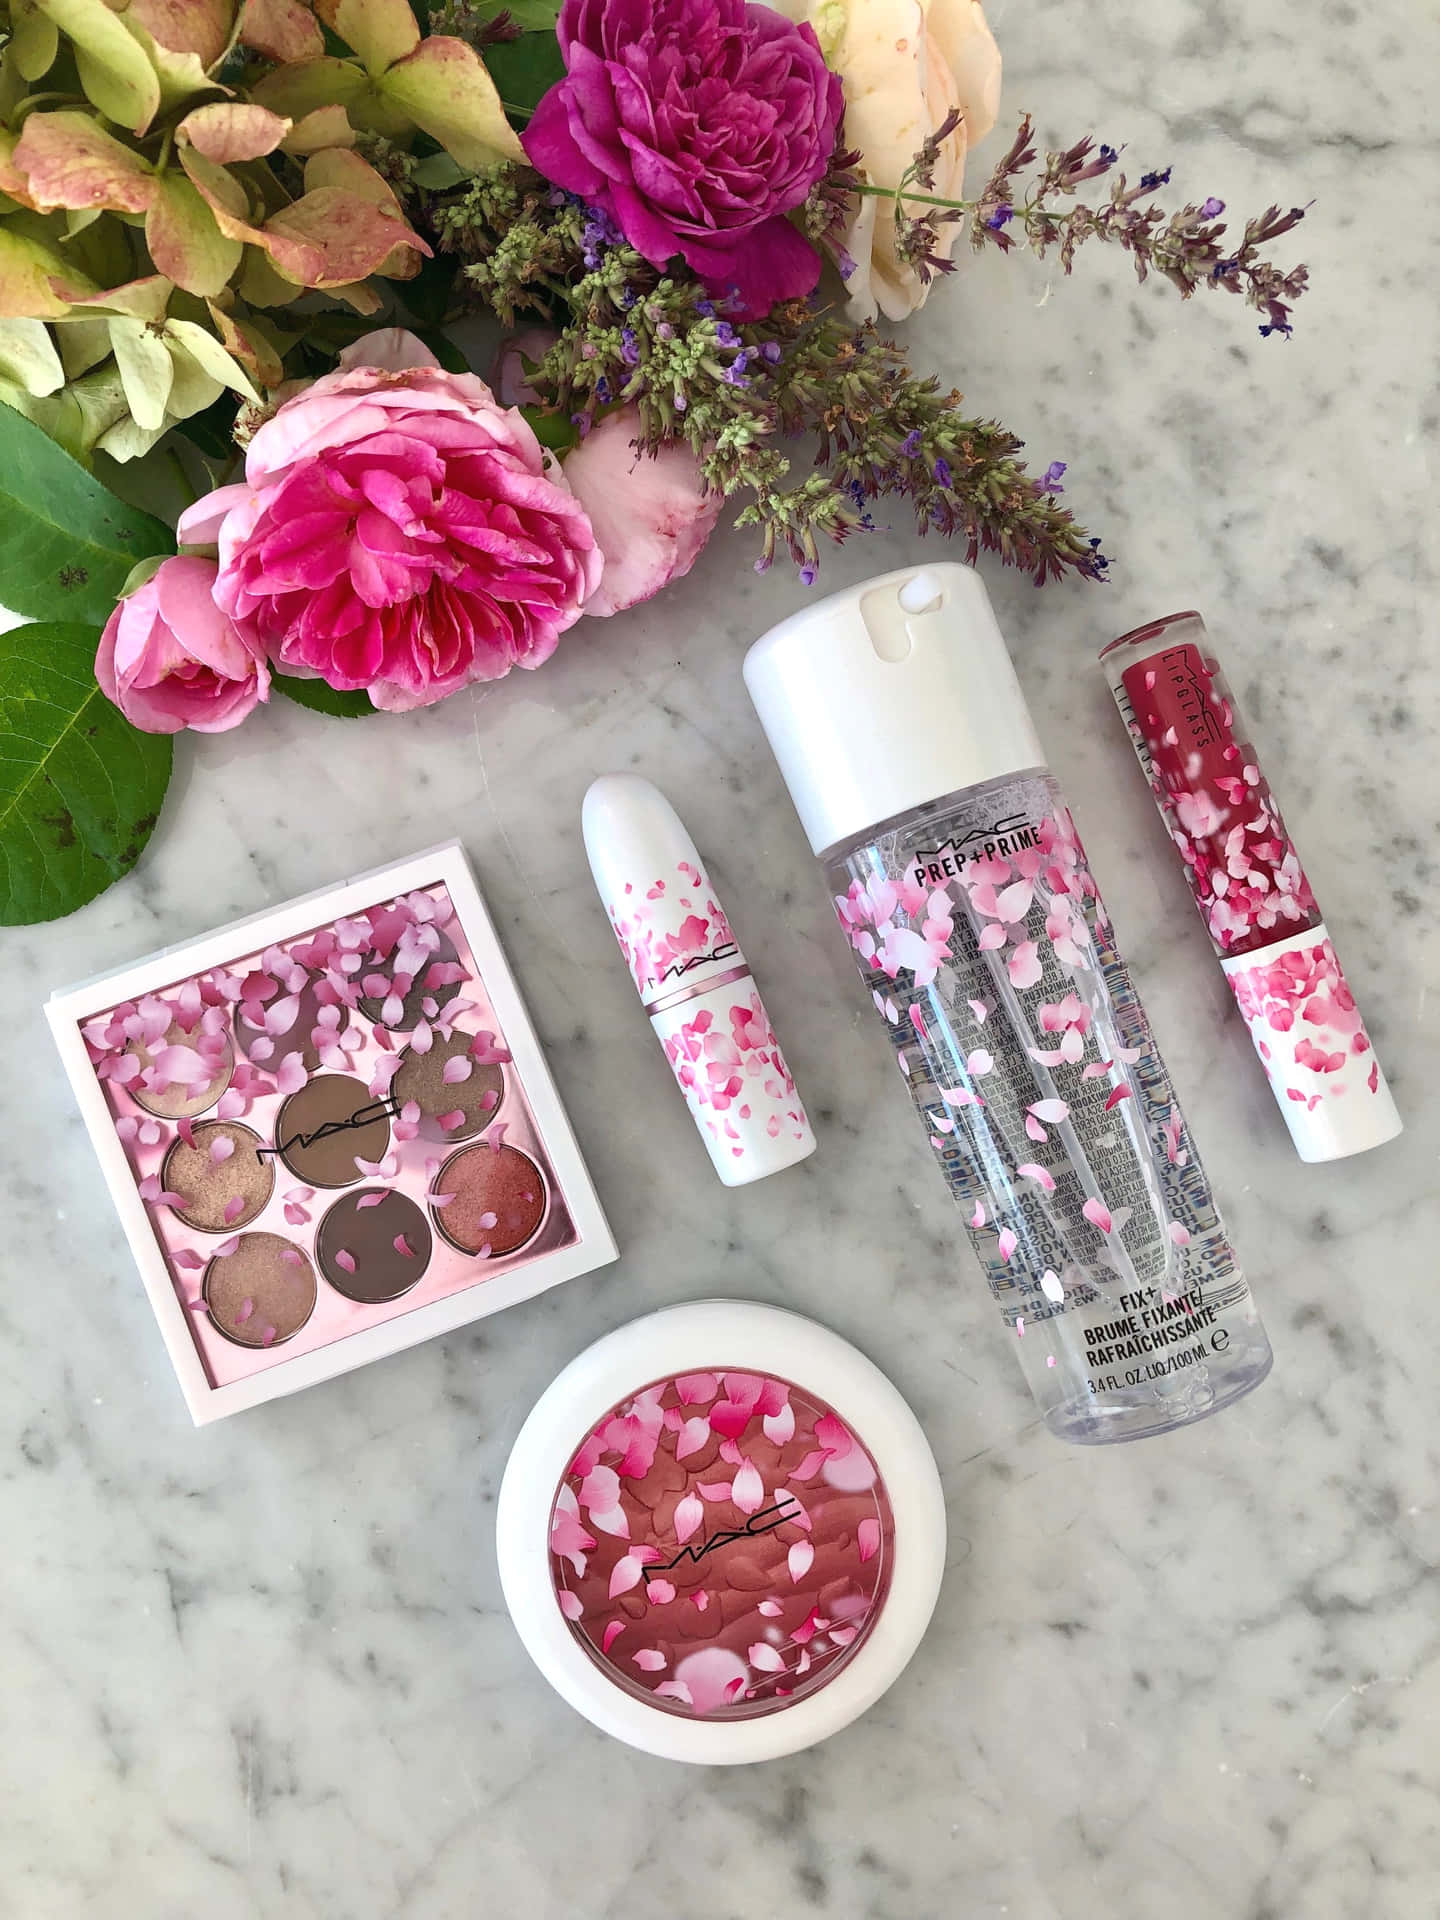 A Pink Flower And Cosmetics On A Marble Table